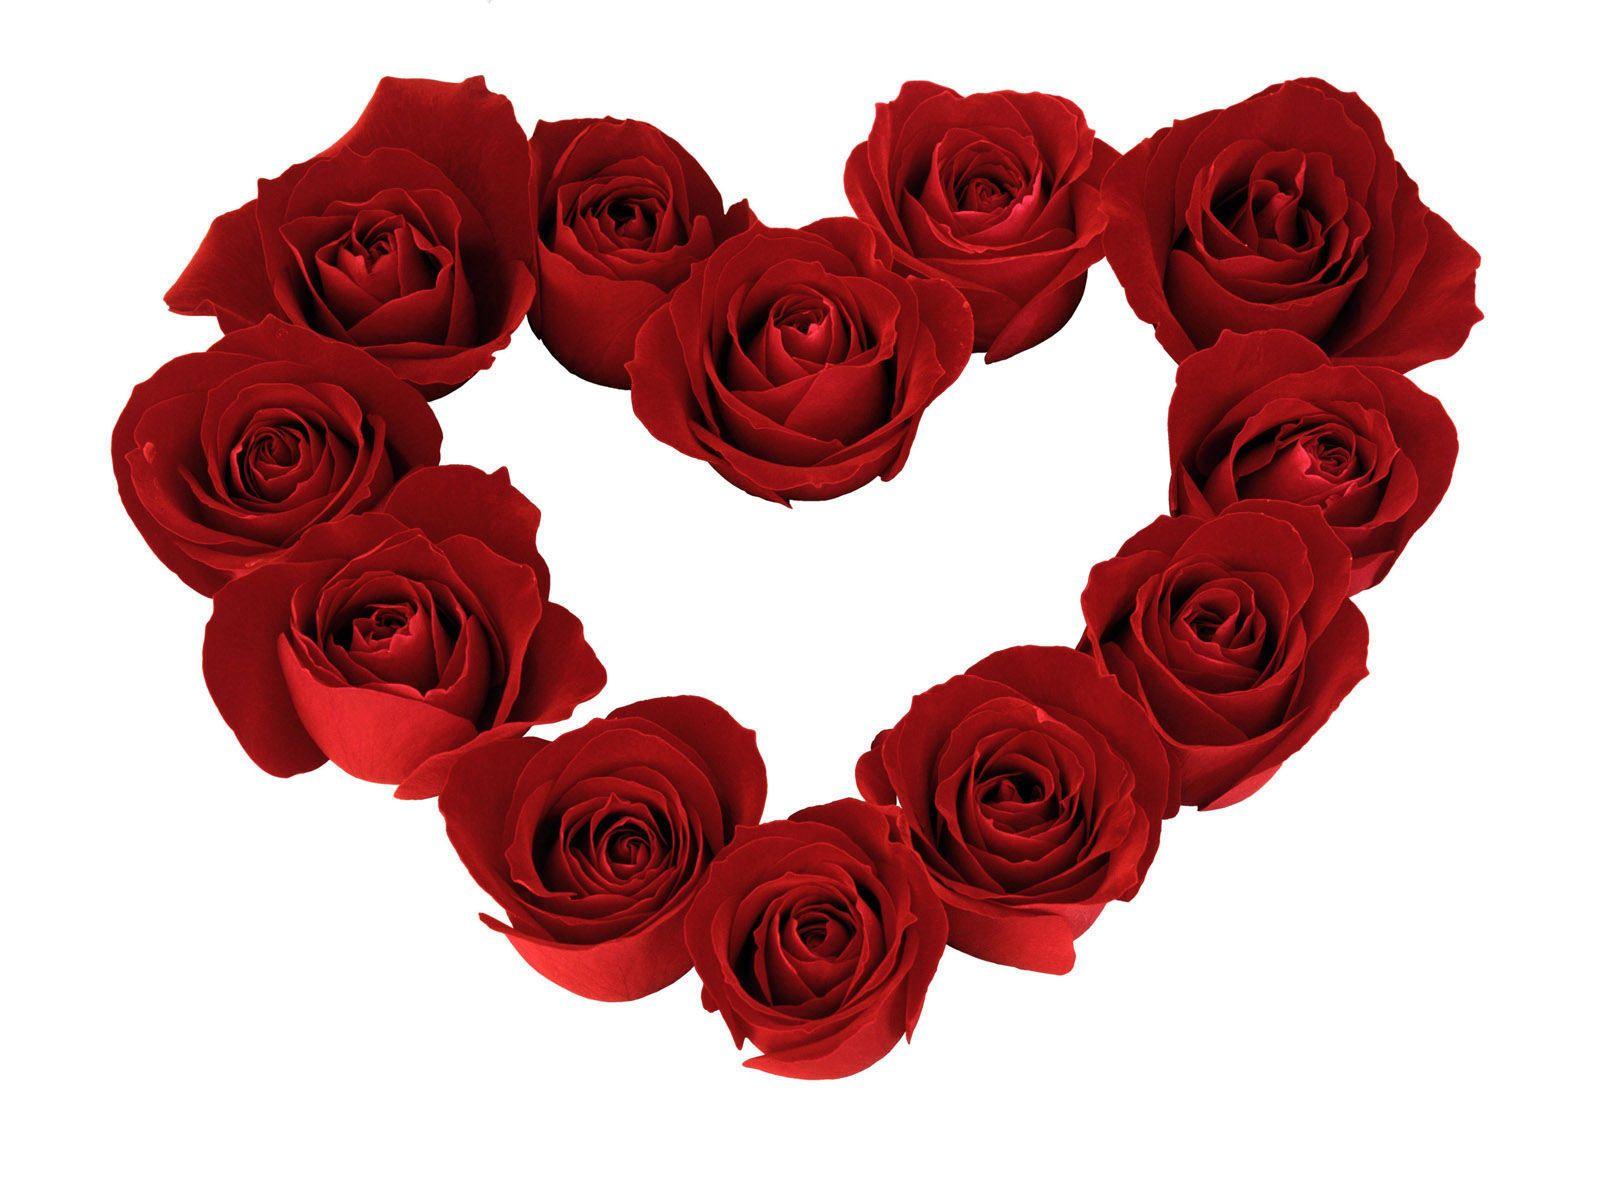 Roses Heart Shape, High Definition, High Quality, Widescreen